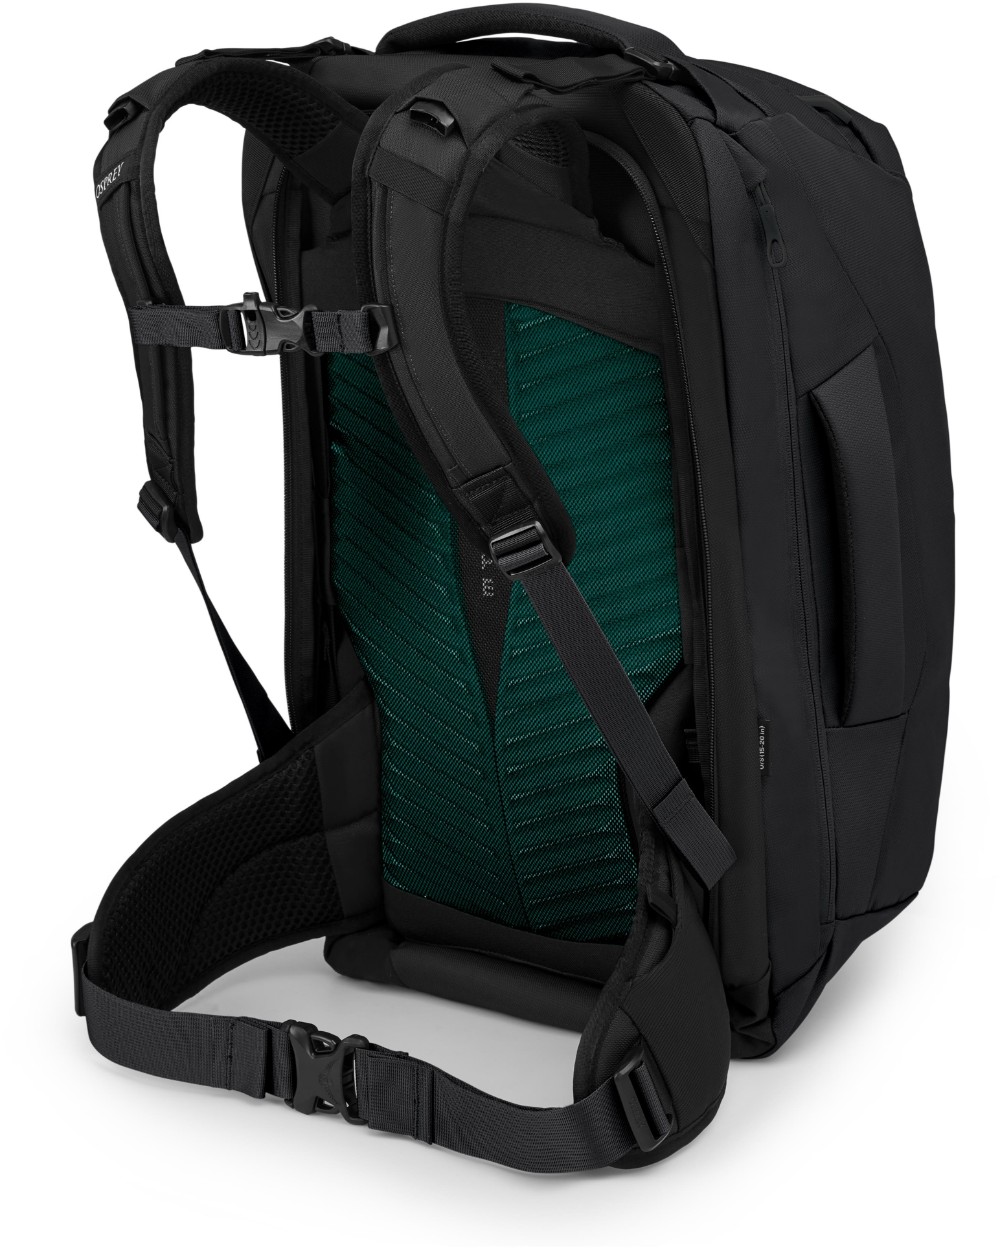 Fairview 40 Womens Travel Backpack image 1